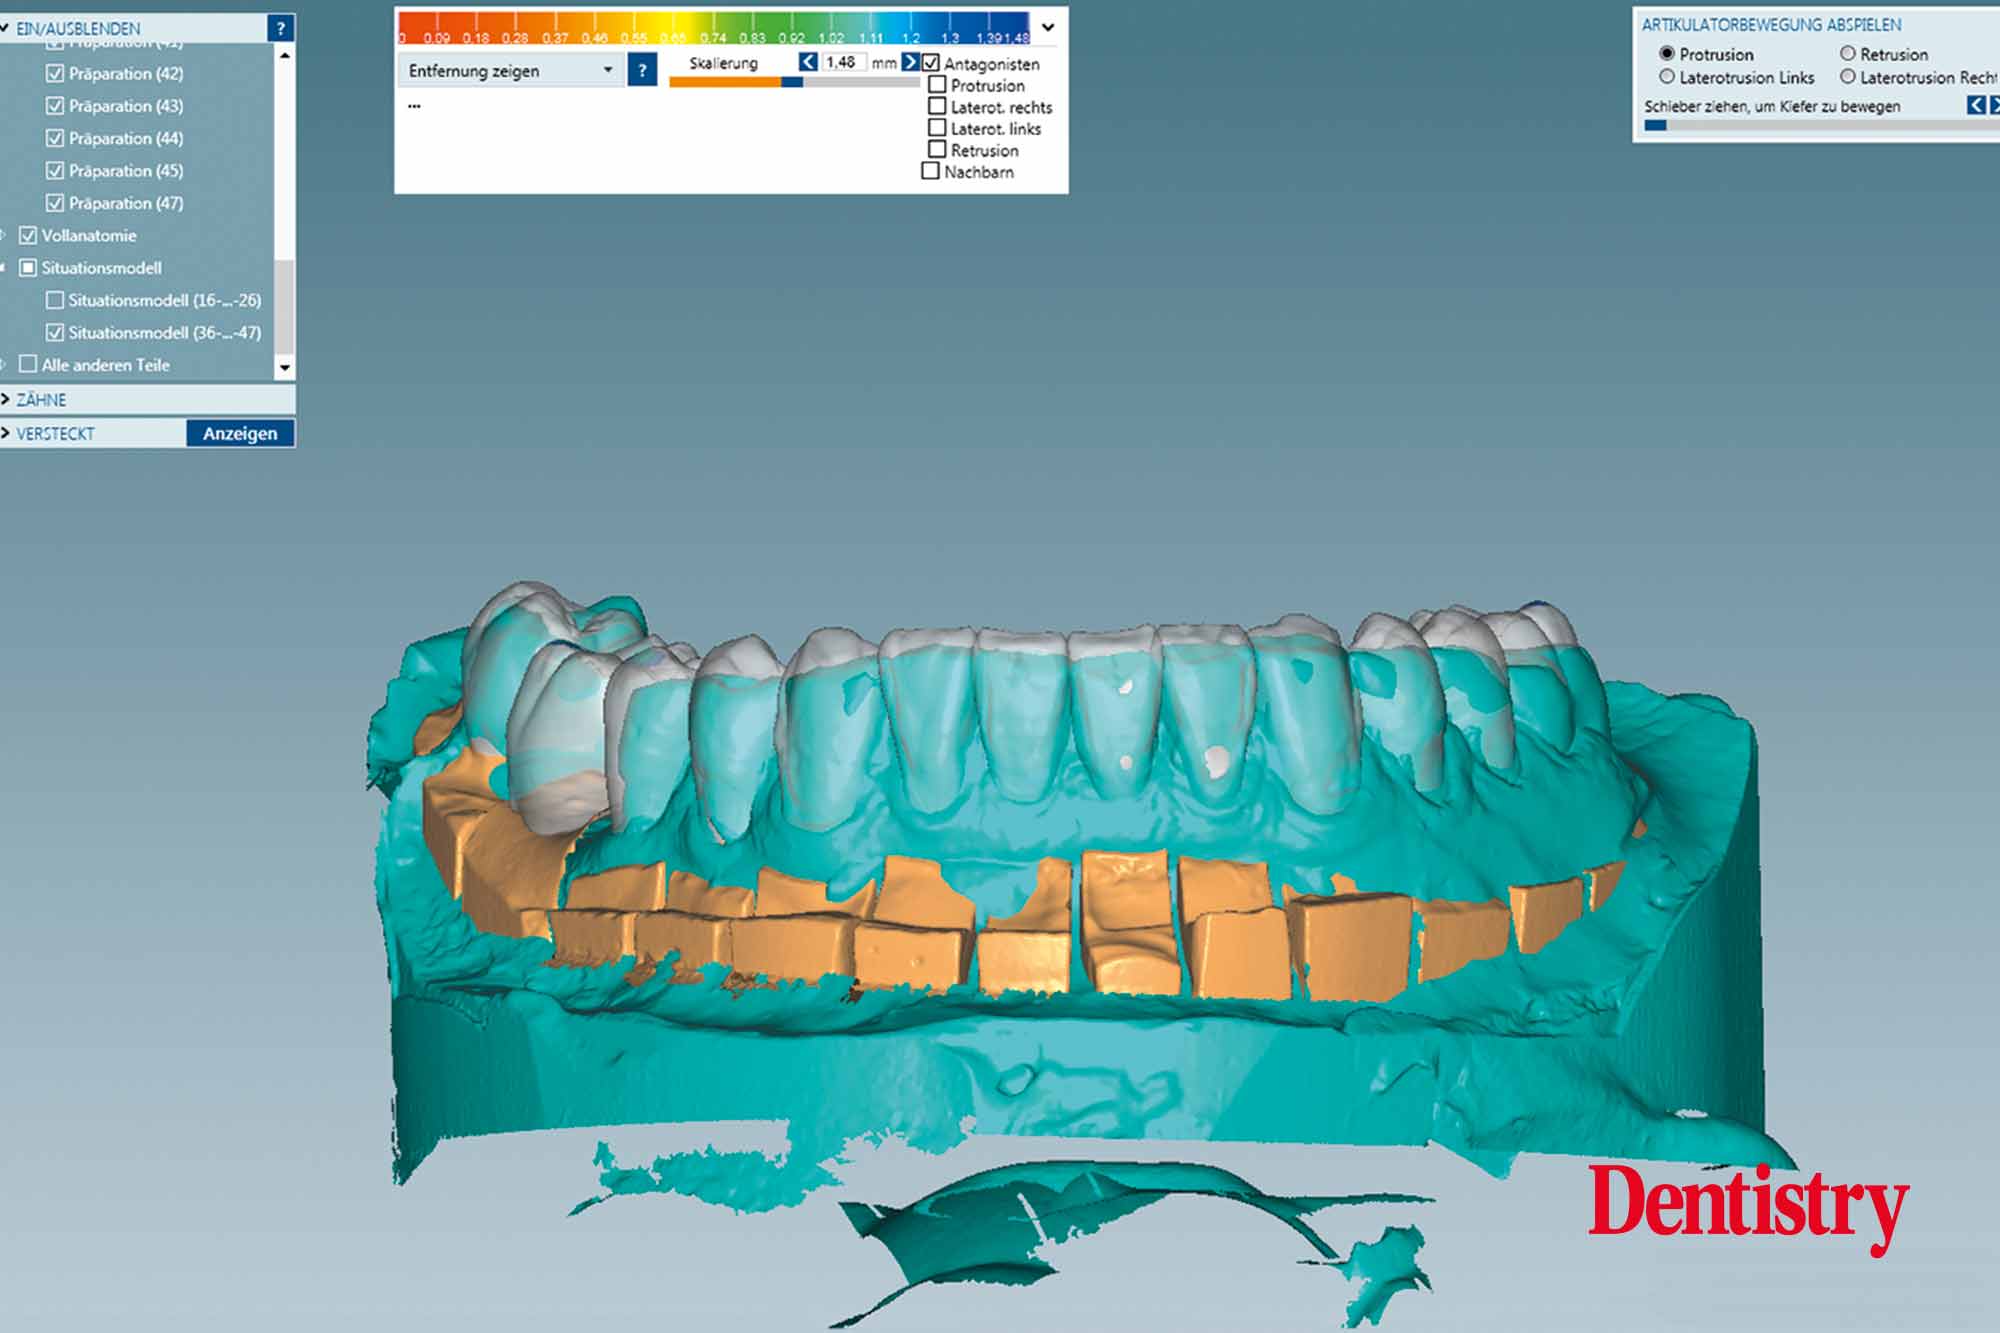 Fabrication and cementation of crowns without chipping